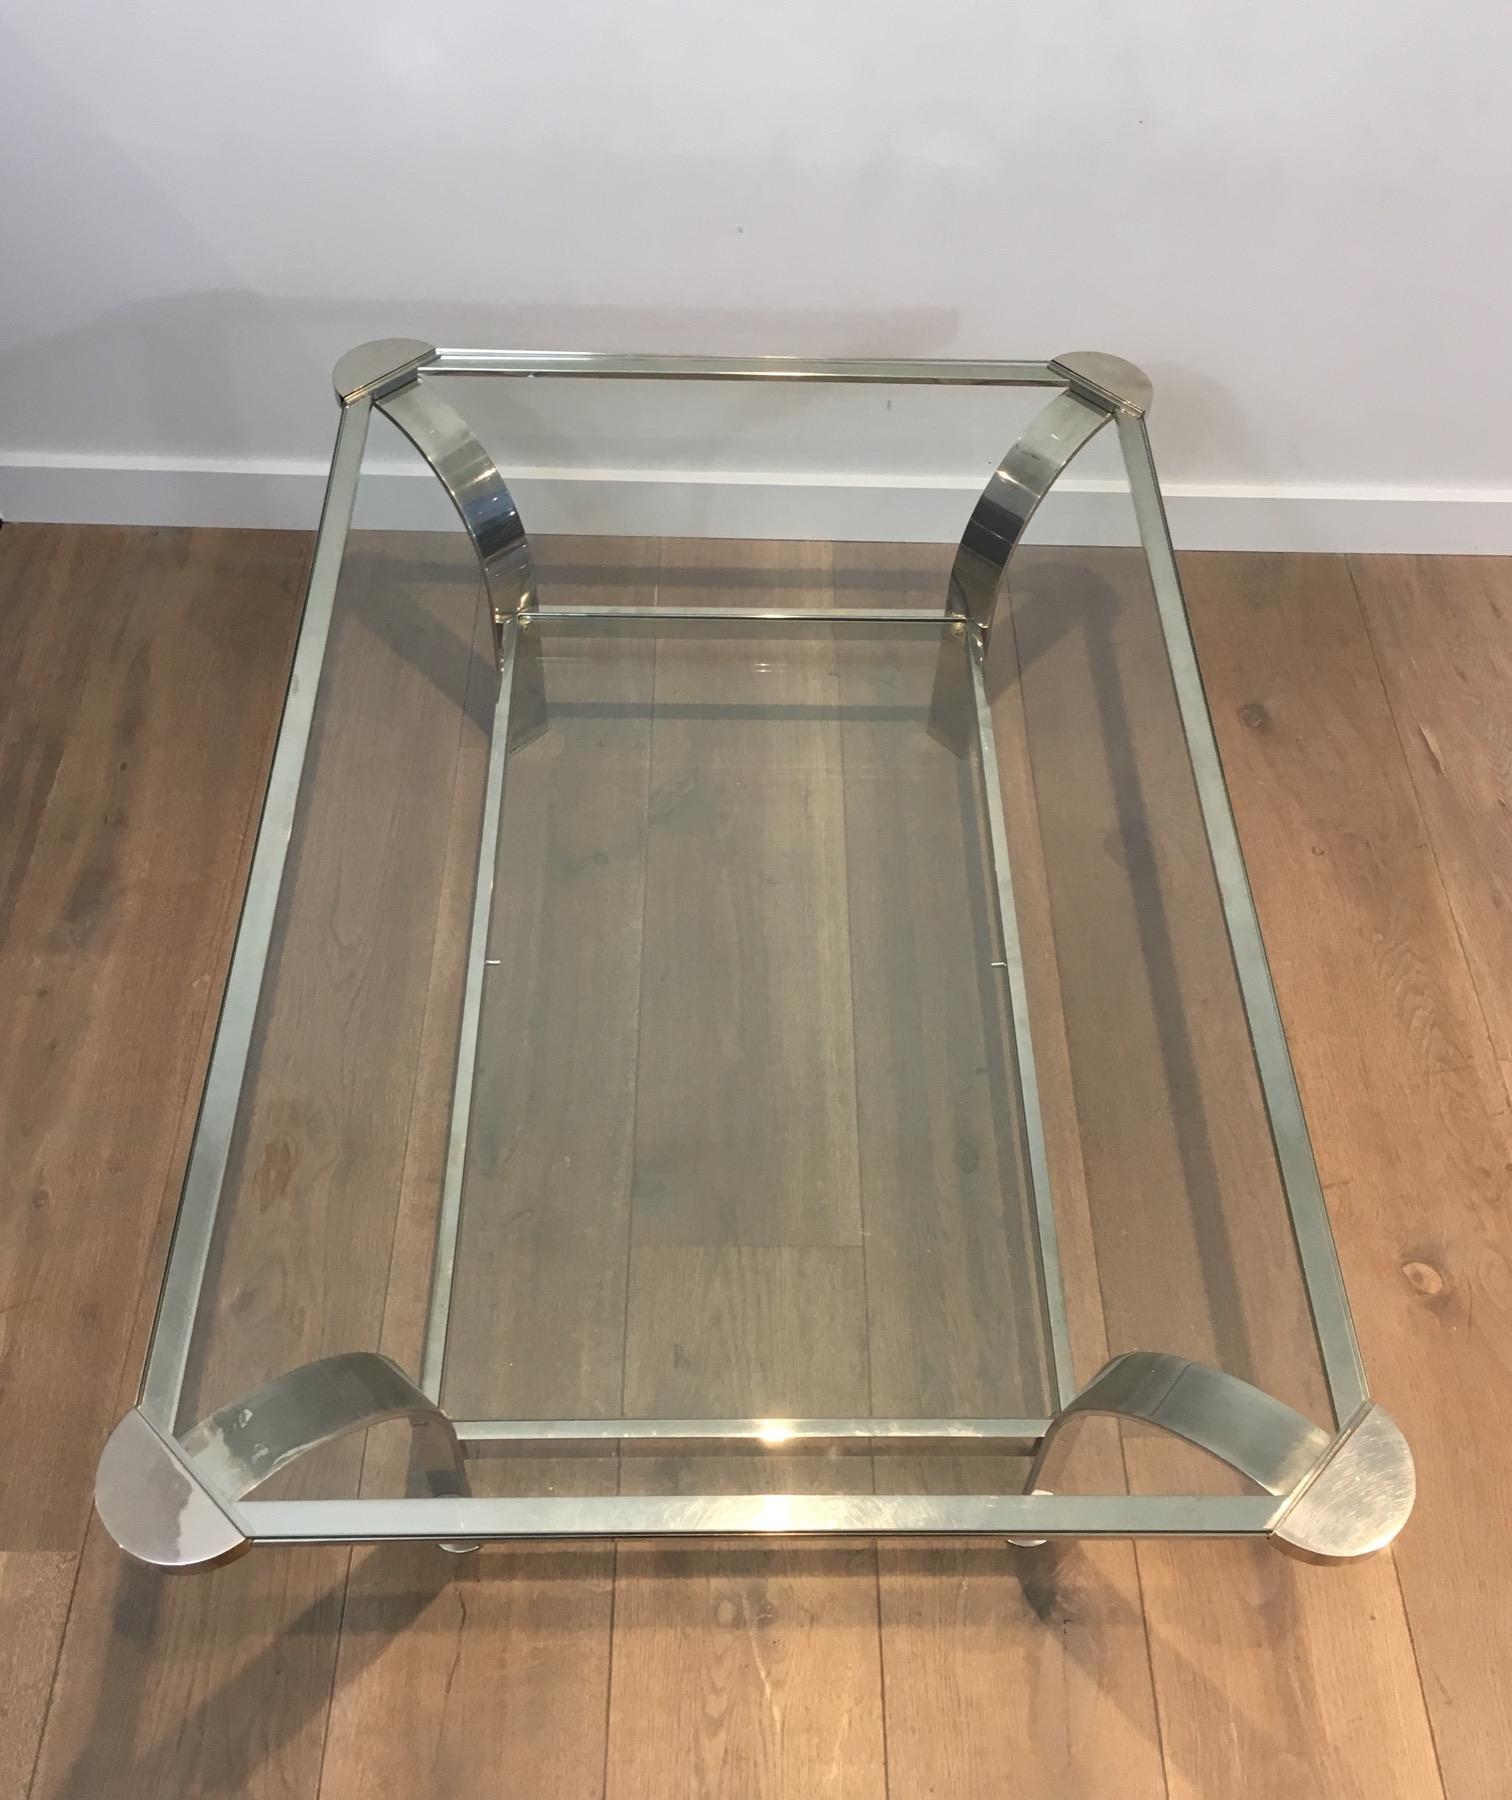 Late 20th Century Large Design Chrome Coffee Table with Glass Shelves, French, Circa 1970 For Sale